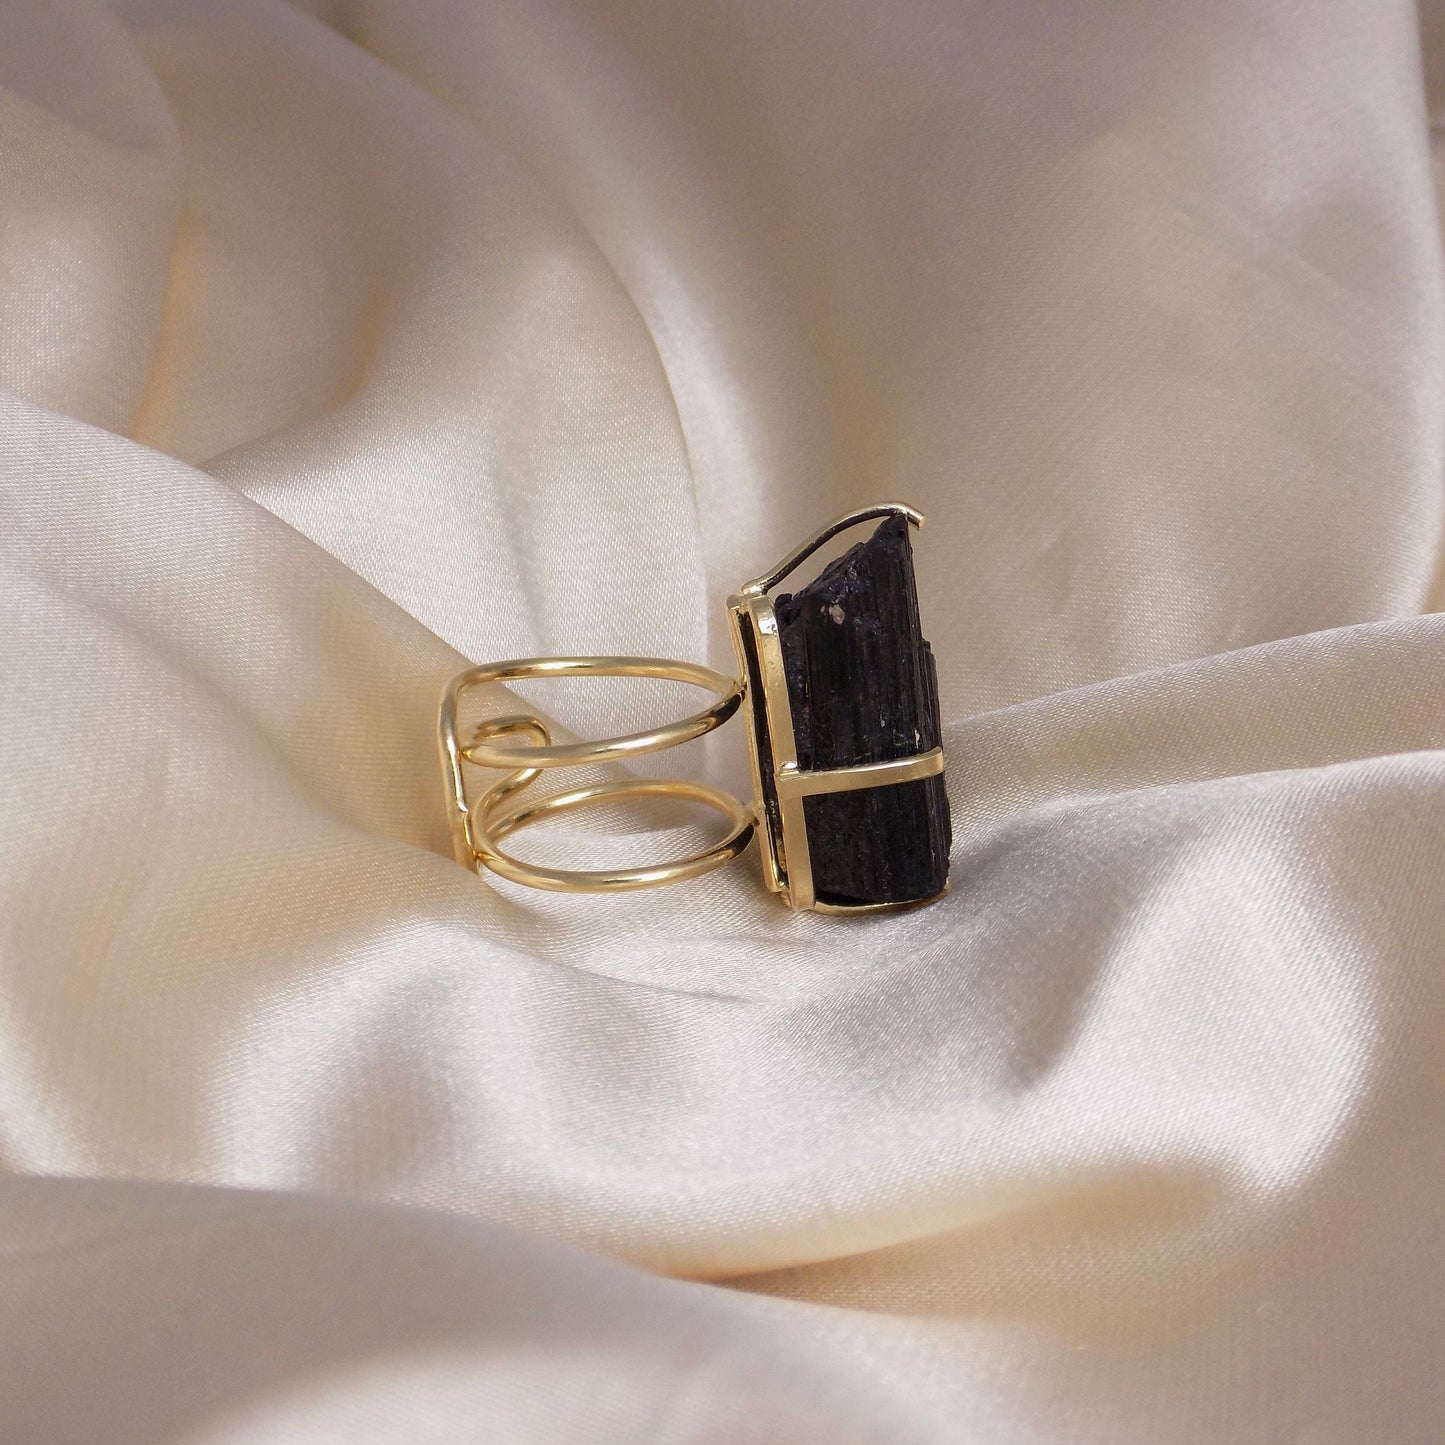 Raw Black Tourmaline Ring Gold Adjustable, Large Black Stone Statement Ring, Gifts For Her, G15-104